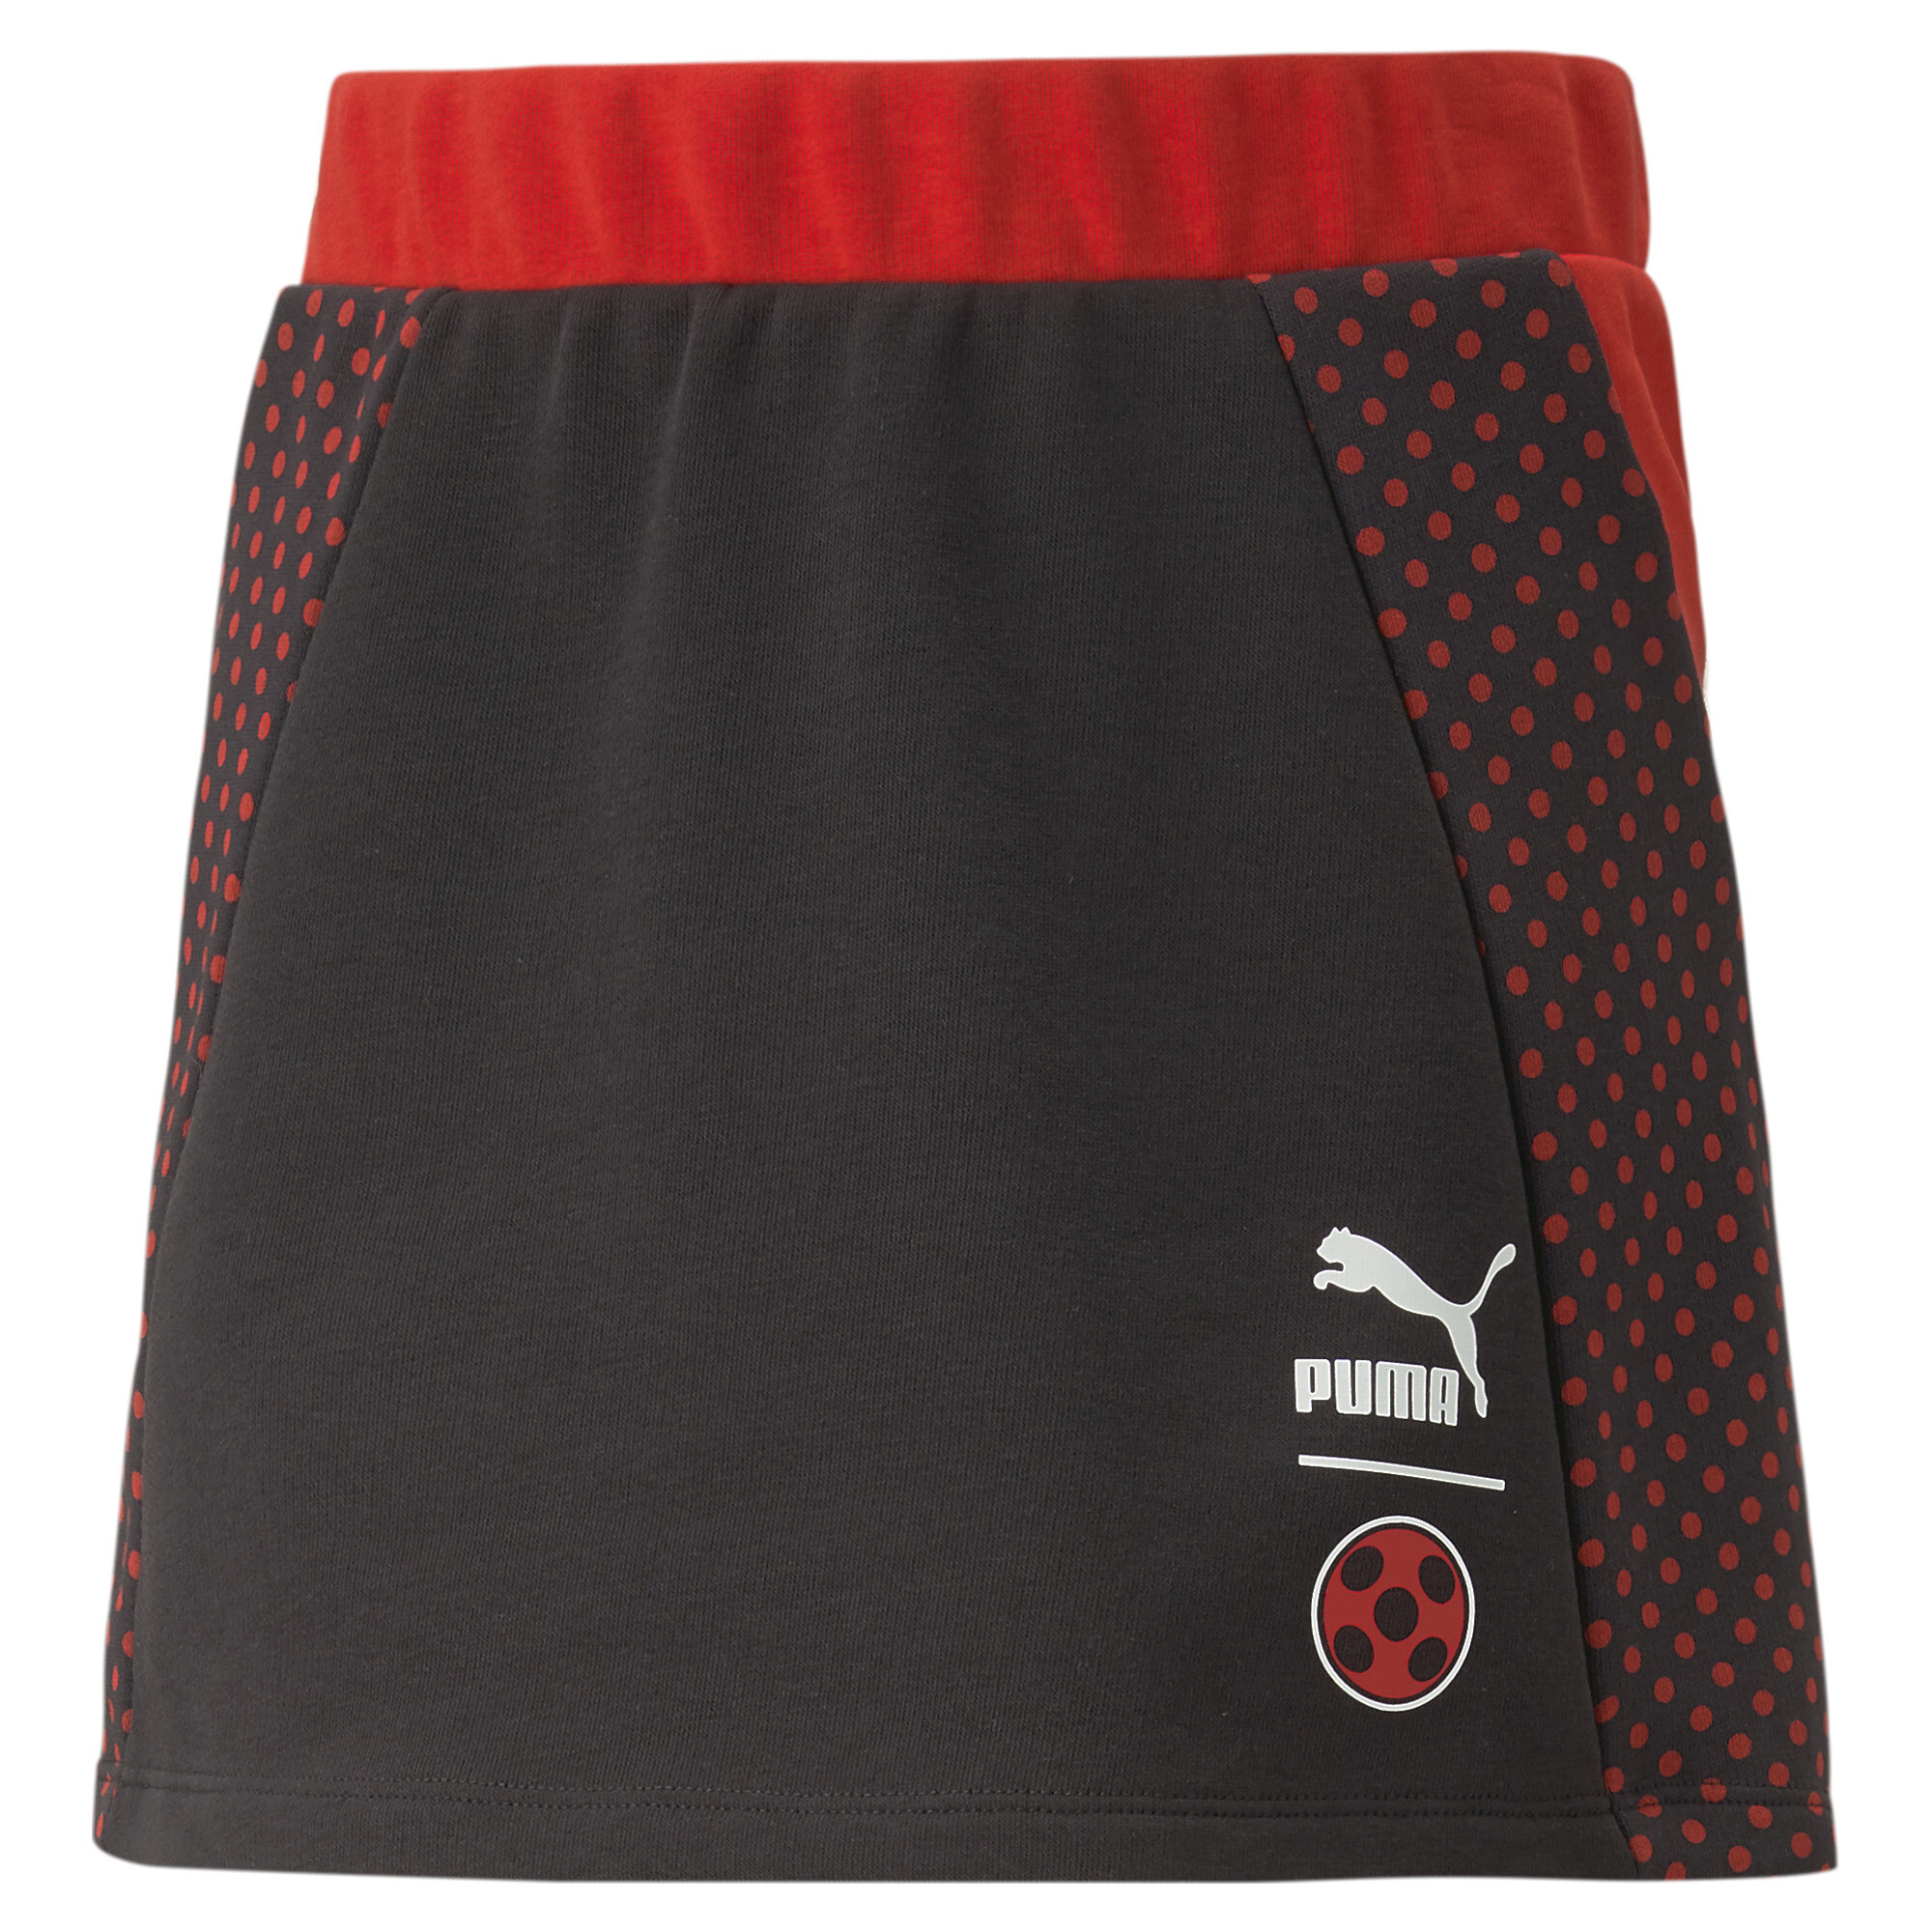 PUMA X MIRACULOUS Skirt In Black, Size 11-12 Youth